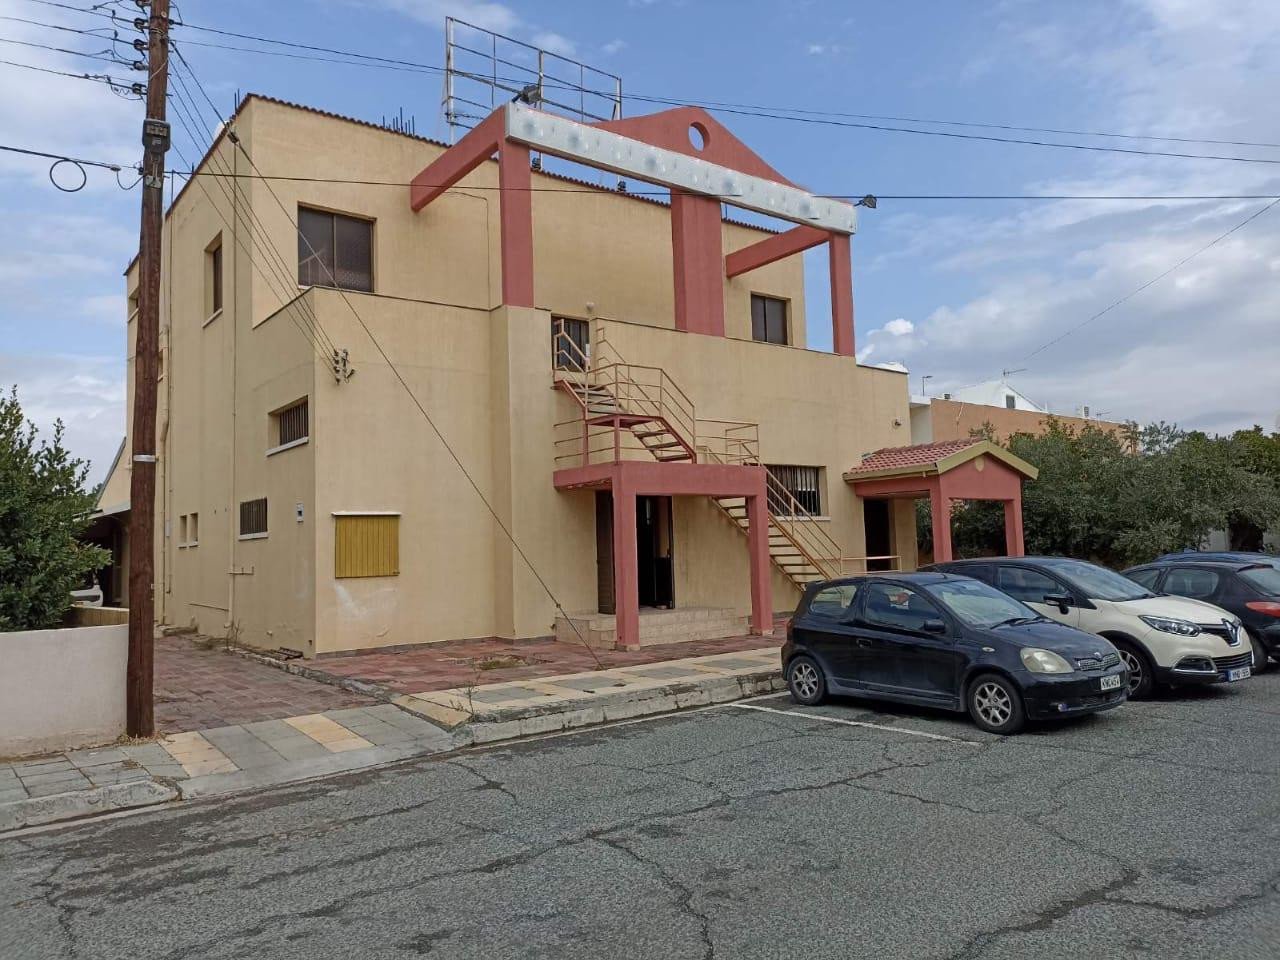 Property for Sale: Commercial (Building) in Polemidia (Pano), Limassol  | Key Realtor Cyprus